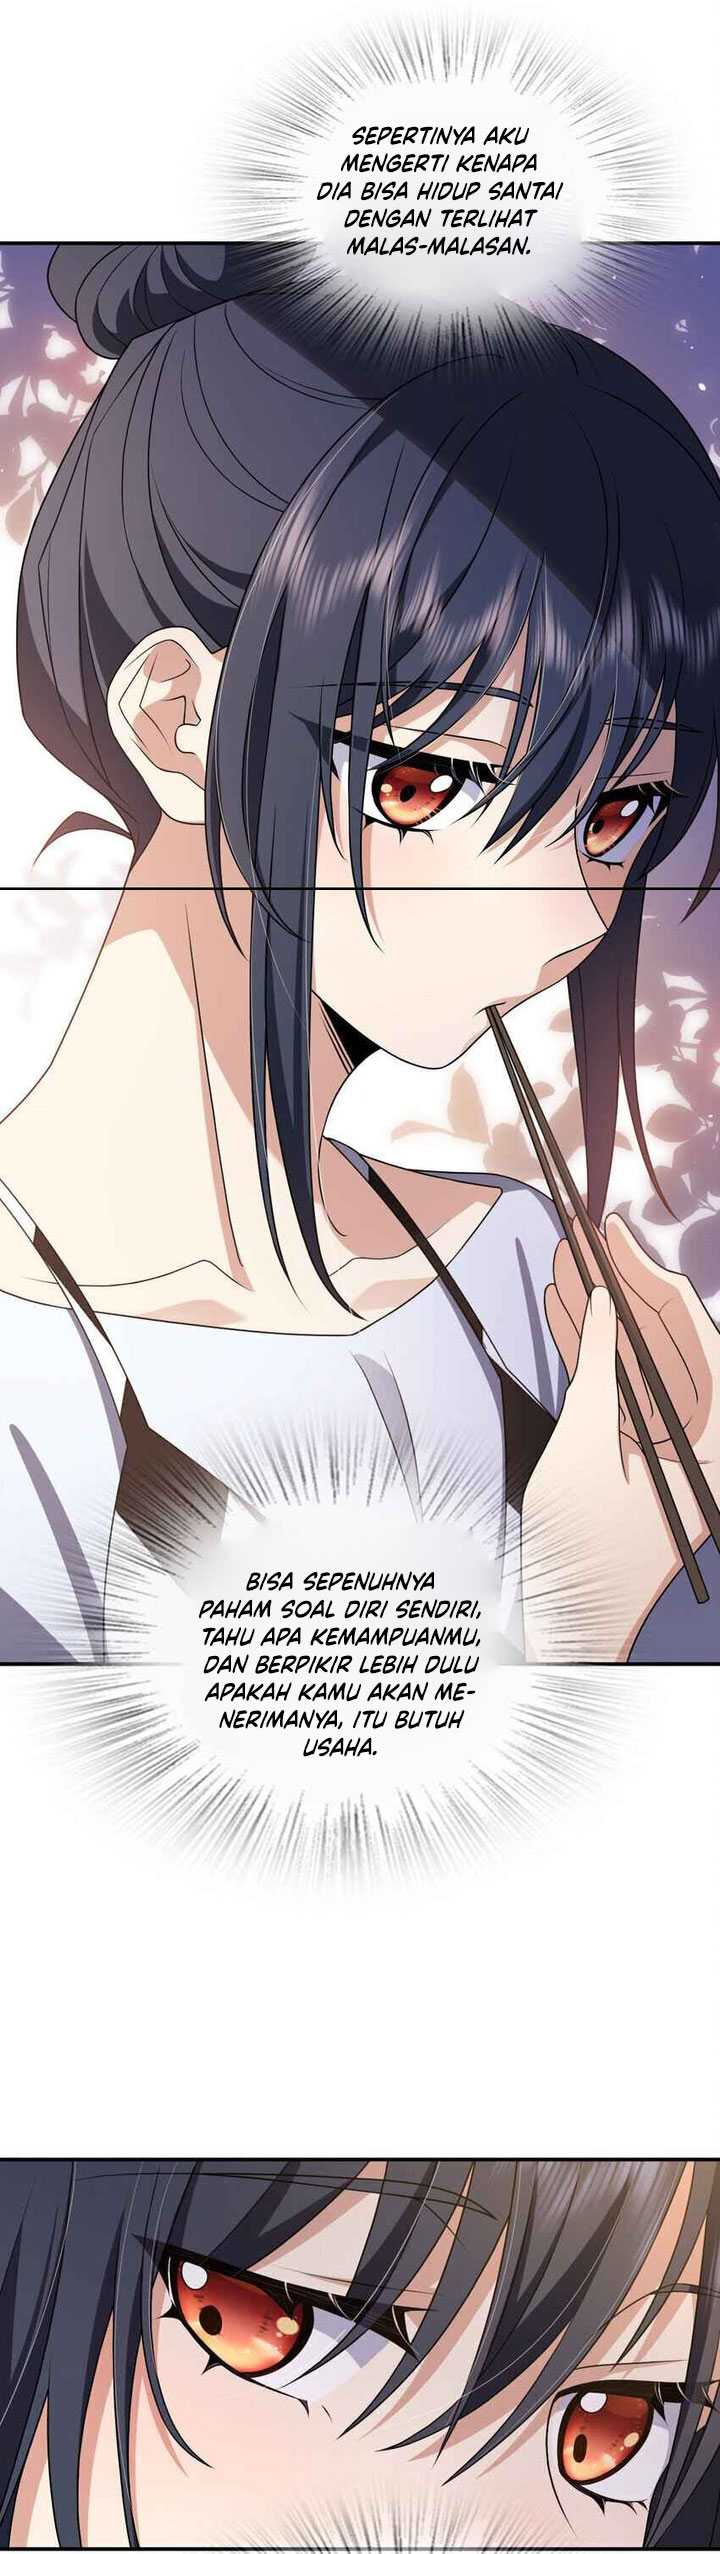 My Wife Is From a Thousand Years Ago Chapter 199 Image 3